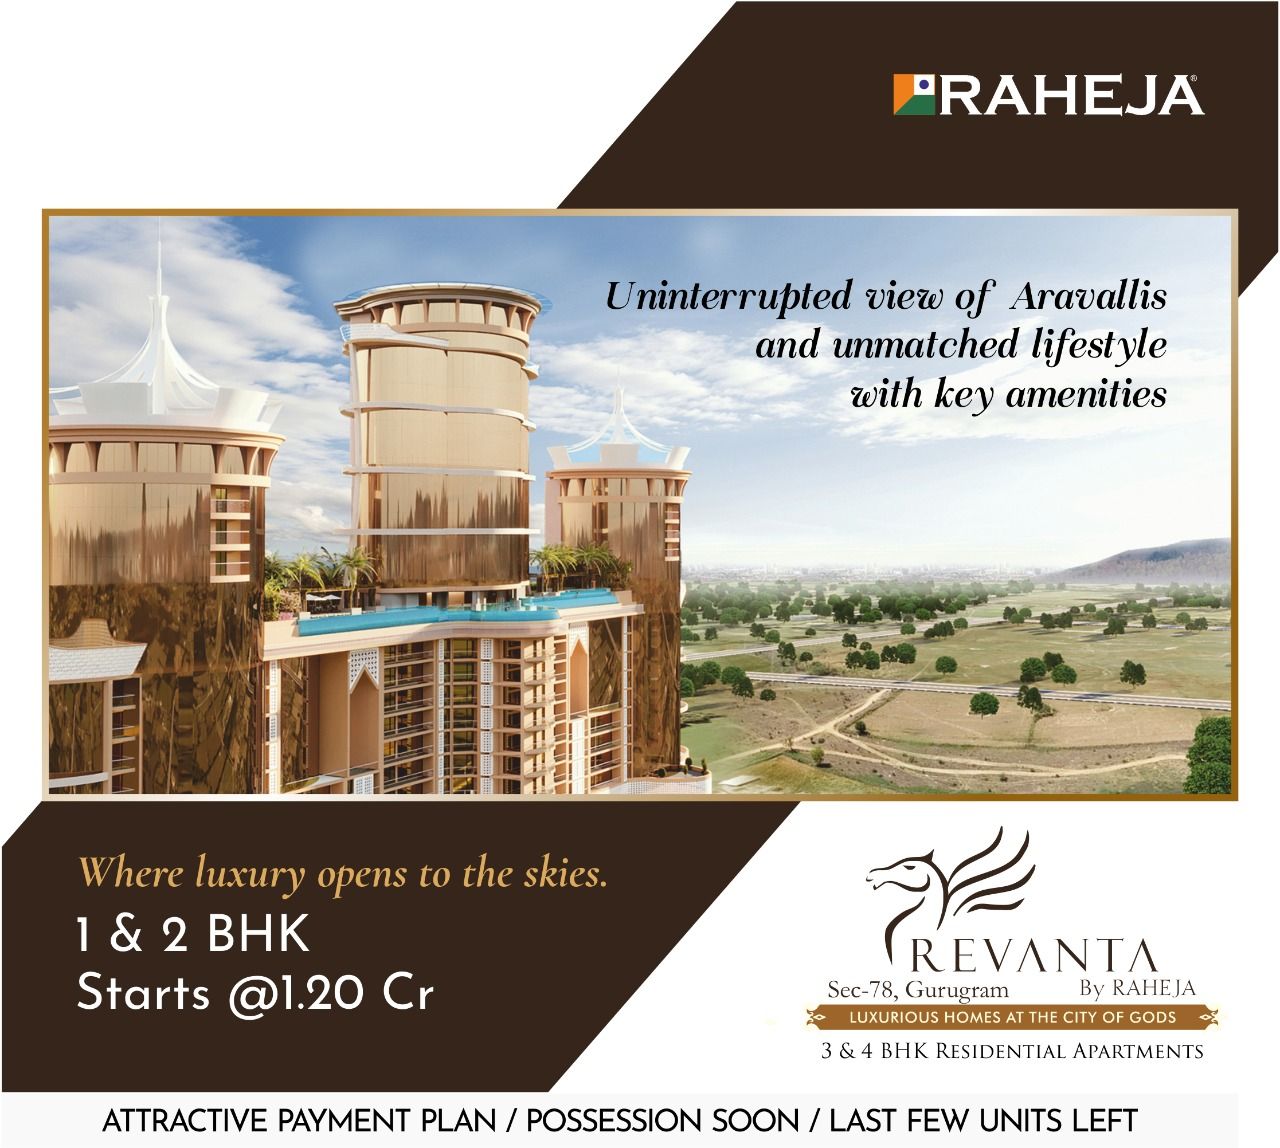 Uninterrupted view of aravallis and unmatched lifestyle with key amenities at Raheja Revanta in Gurgaon Update